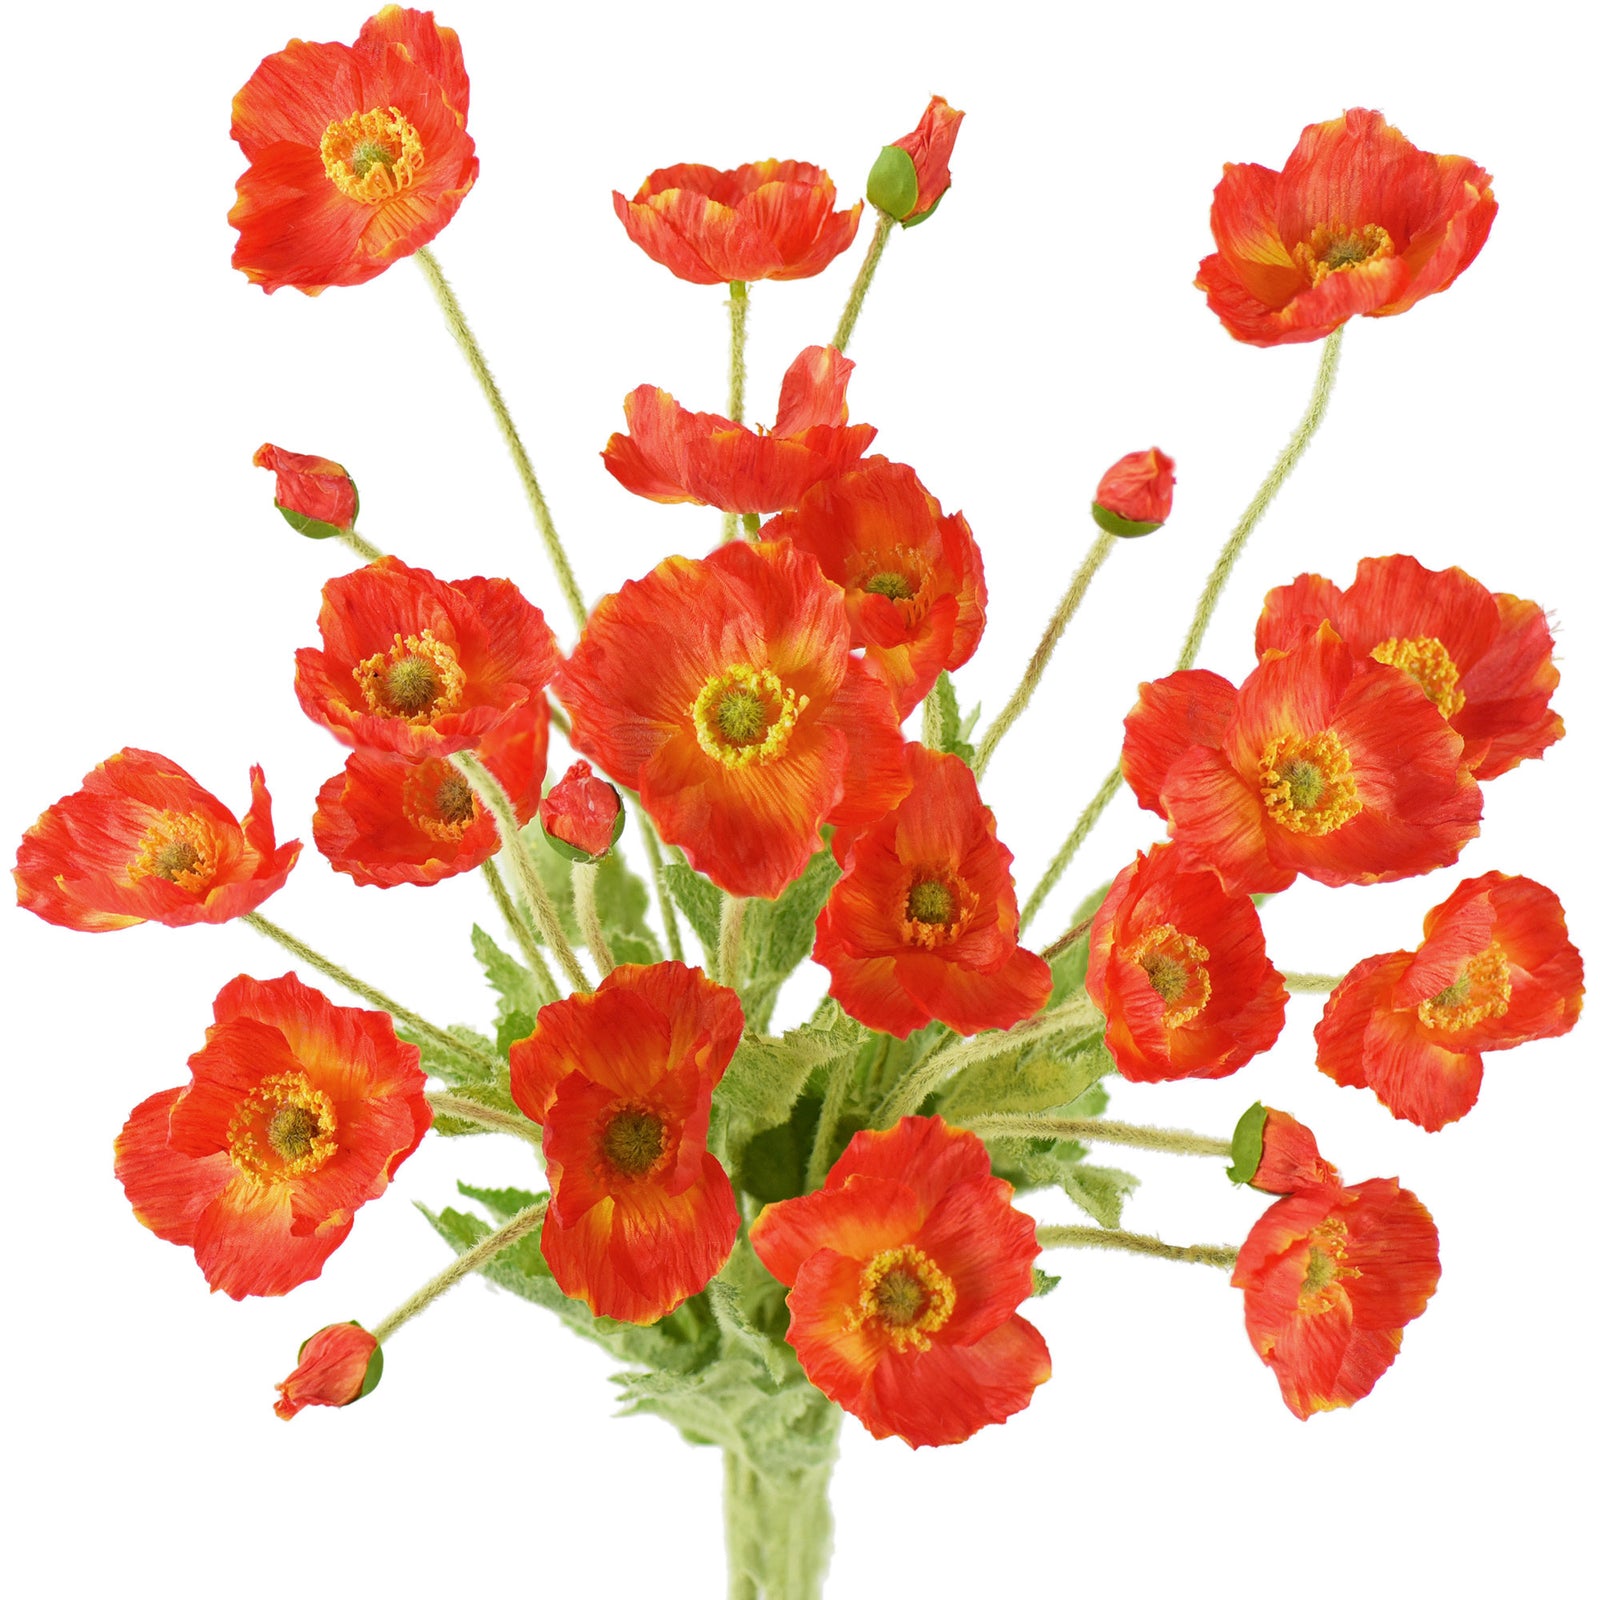 Burning Orange Silk Poppies Artificial Flower Bouquet for Remembrance Home Wedding 6 Stems 23.6'' (60cm)